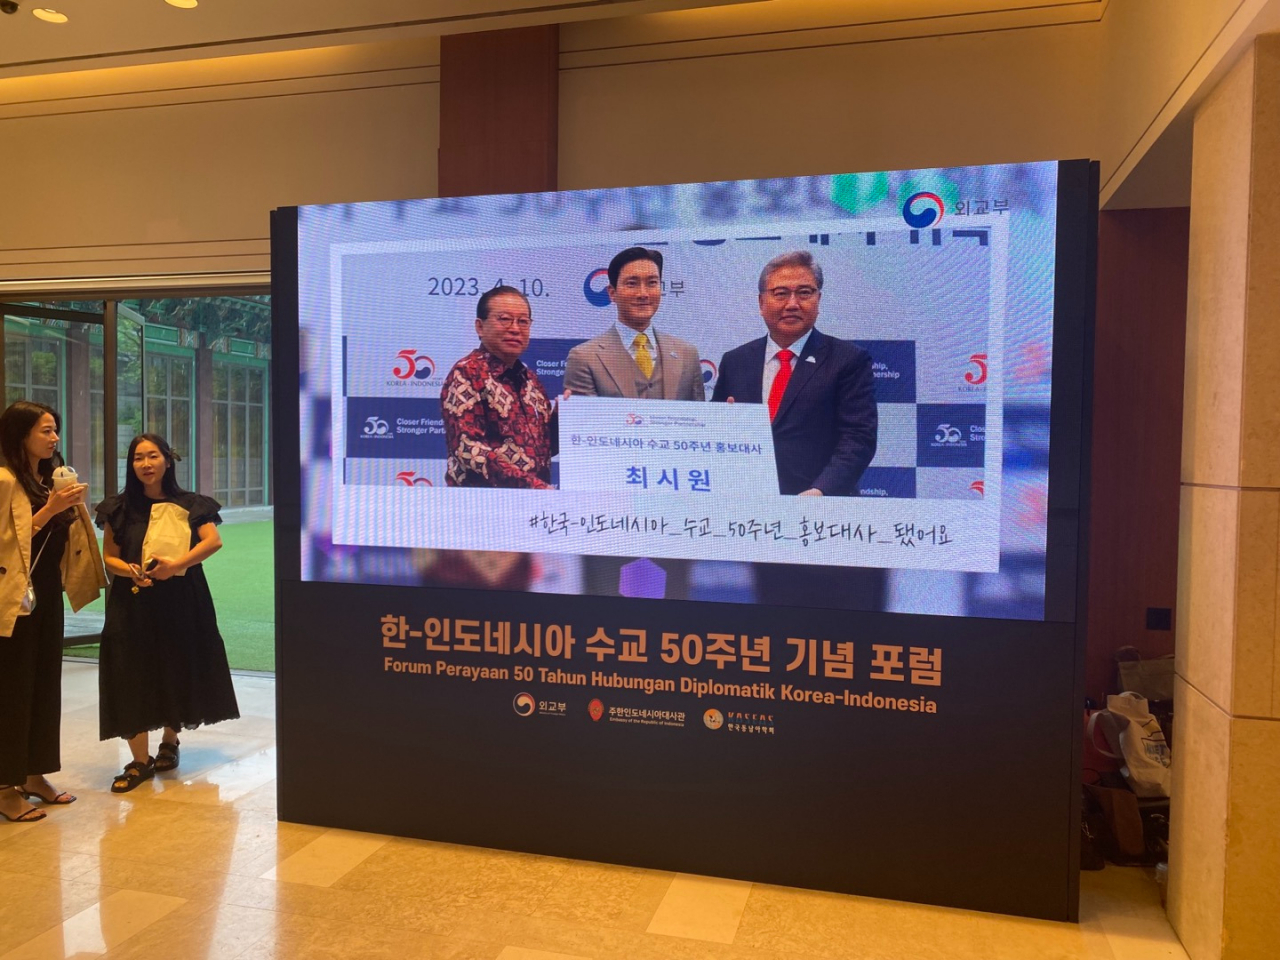 A video showcasing the appointment of Choi Si-won of K-pop boy band Super Junioras an honorary ambassador by Indonesian Ambassador to Korea Gandi Sulistiyanto, South Korean Foreign Minister Park Jin at the Indonesia-Korea Forum commemorating 5o years of diplomatic relations at Shilla Seoul on Monday. (Sanjay Kumar/The Korea Herald)